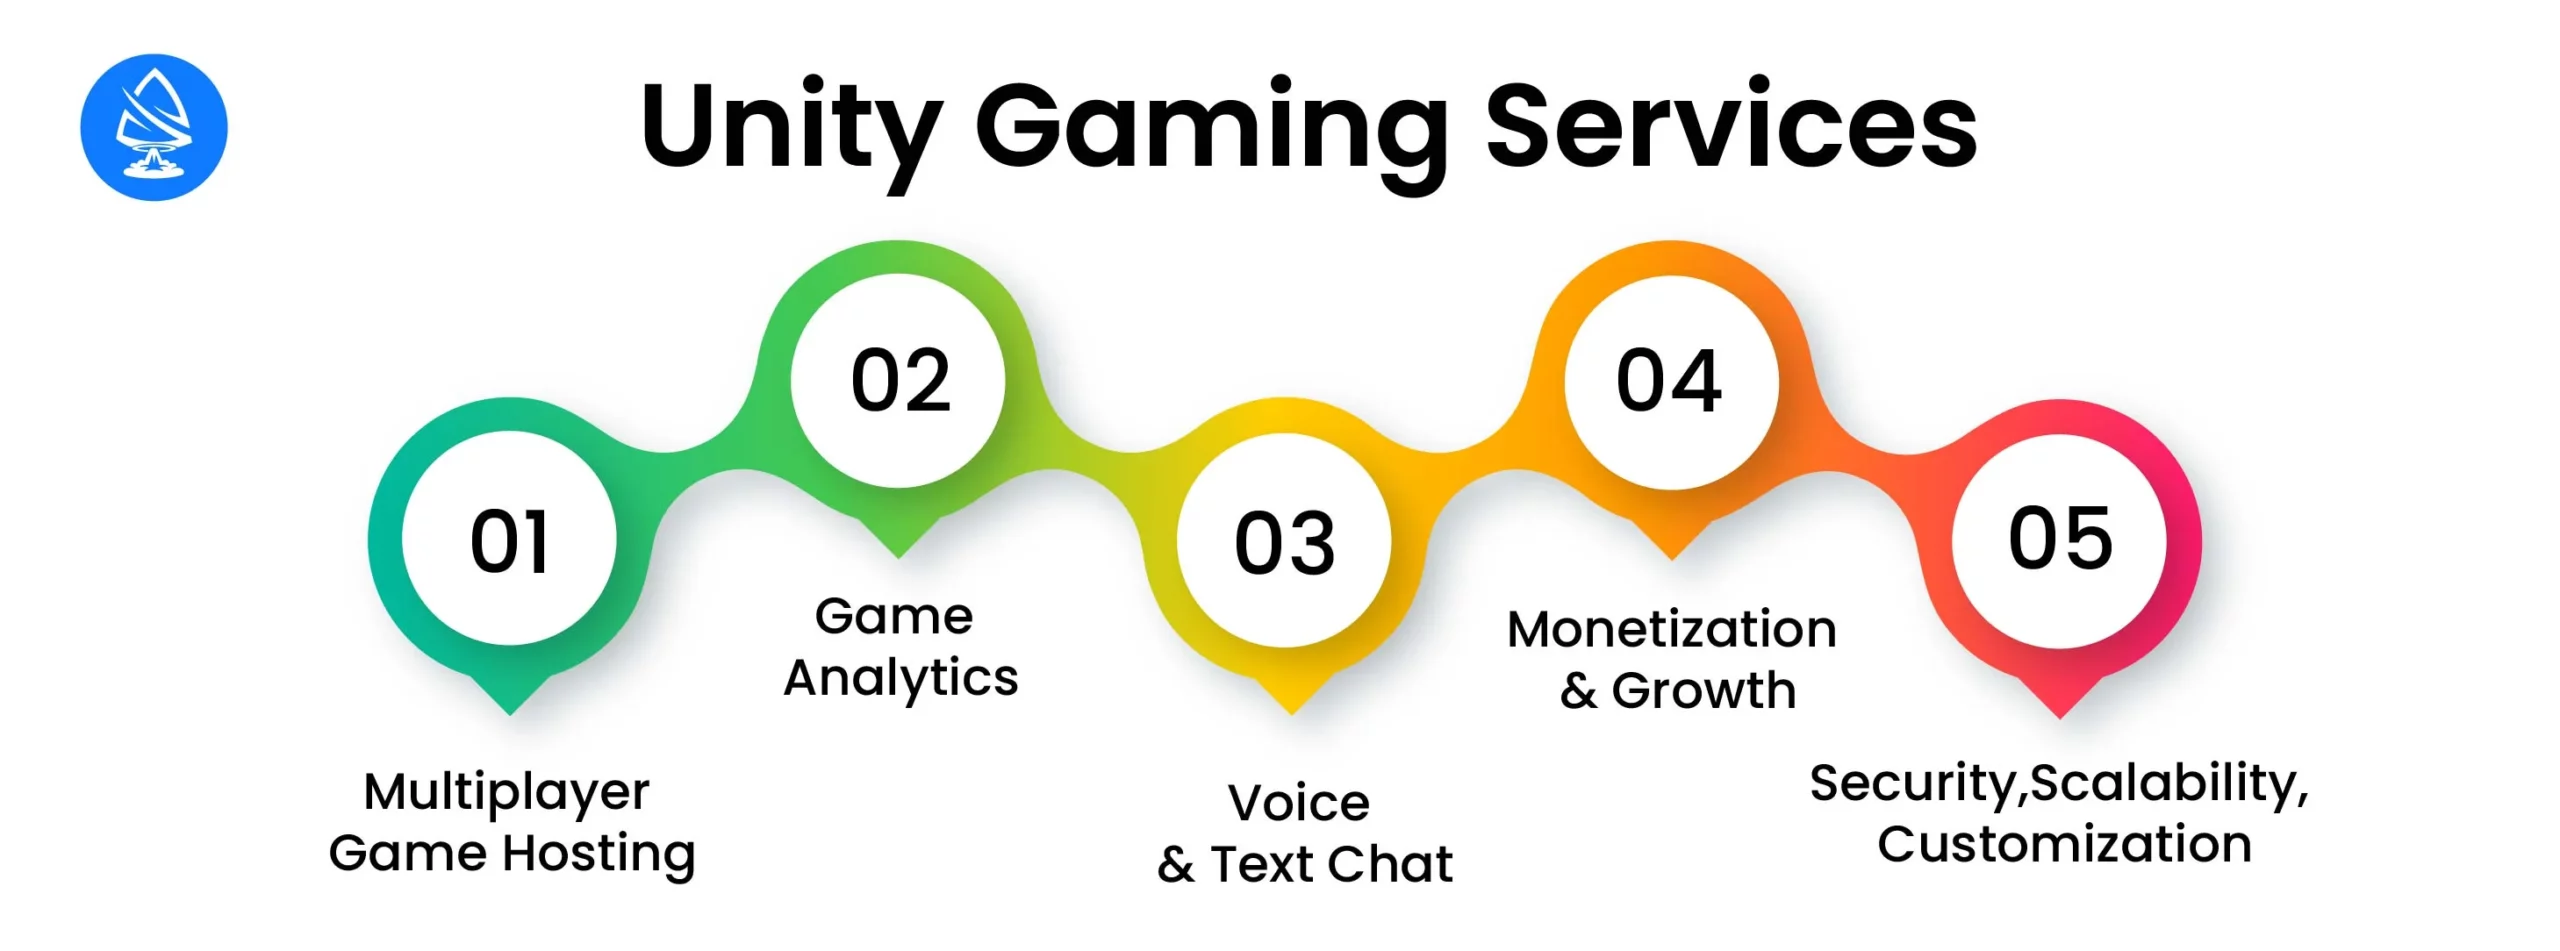 Unity Gaming Services for Businesses